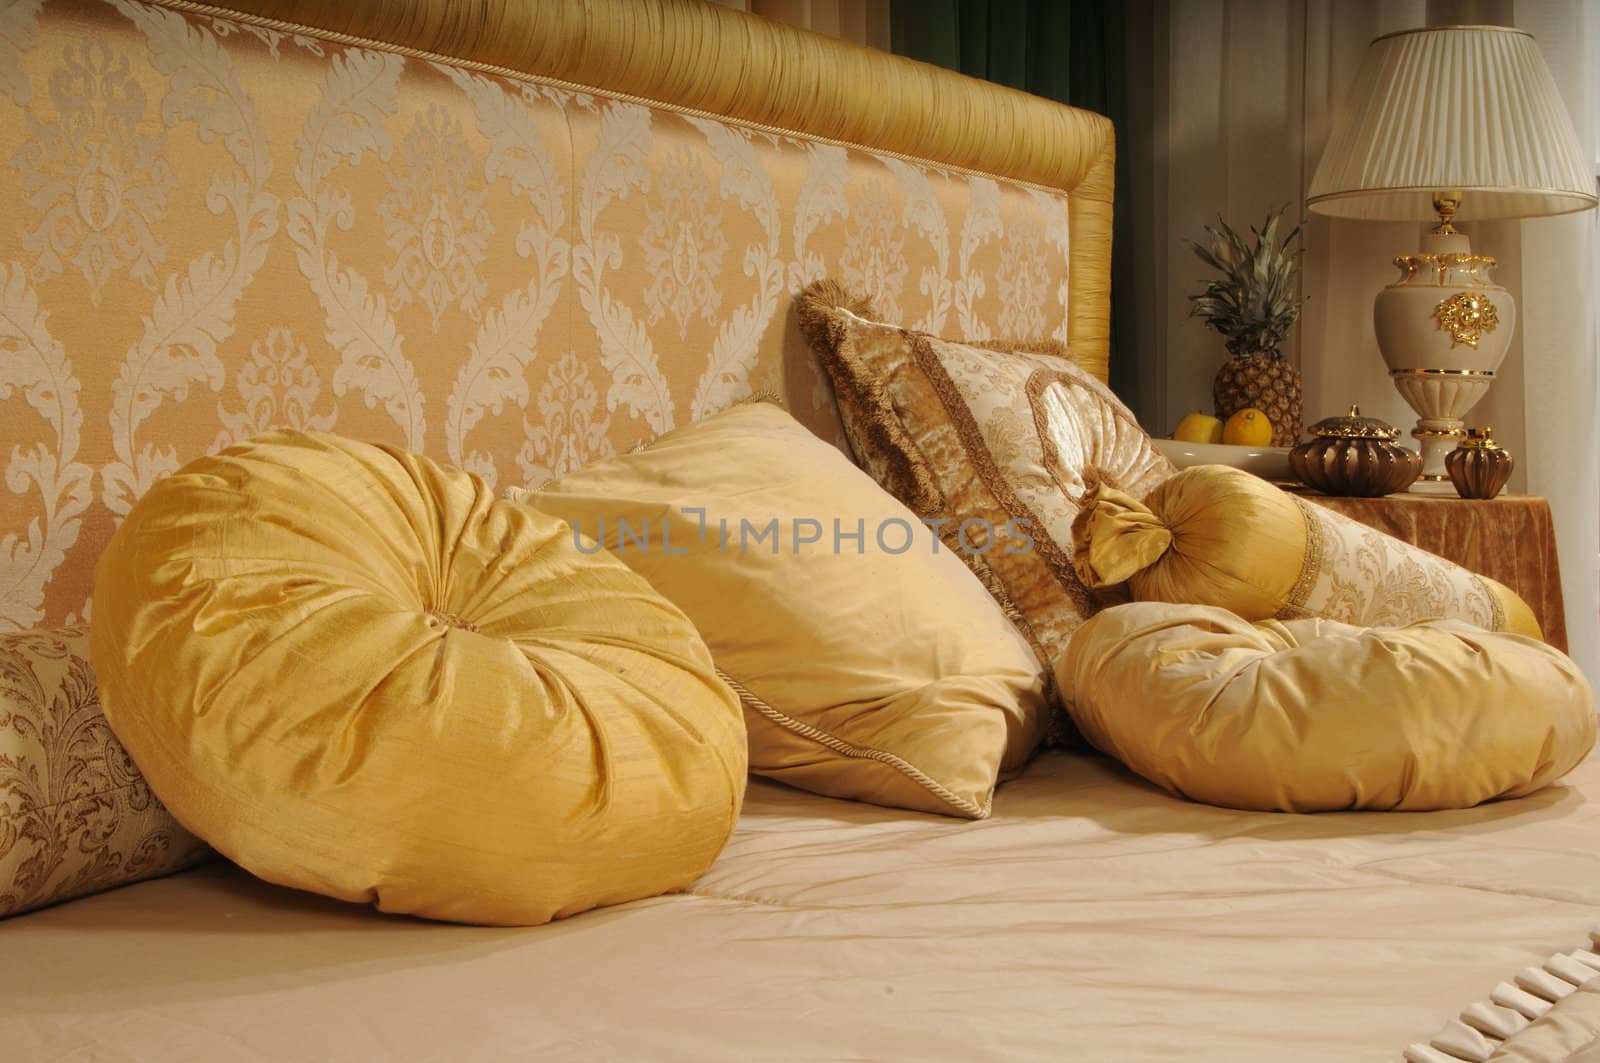 Decorative pillows by dyoma